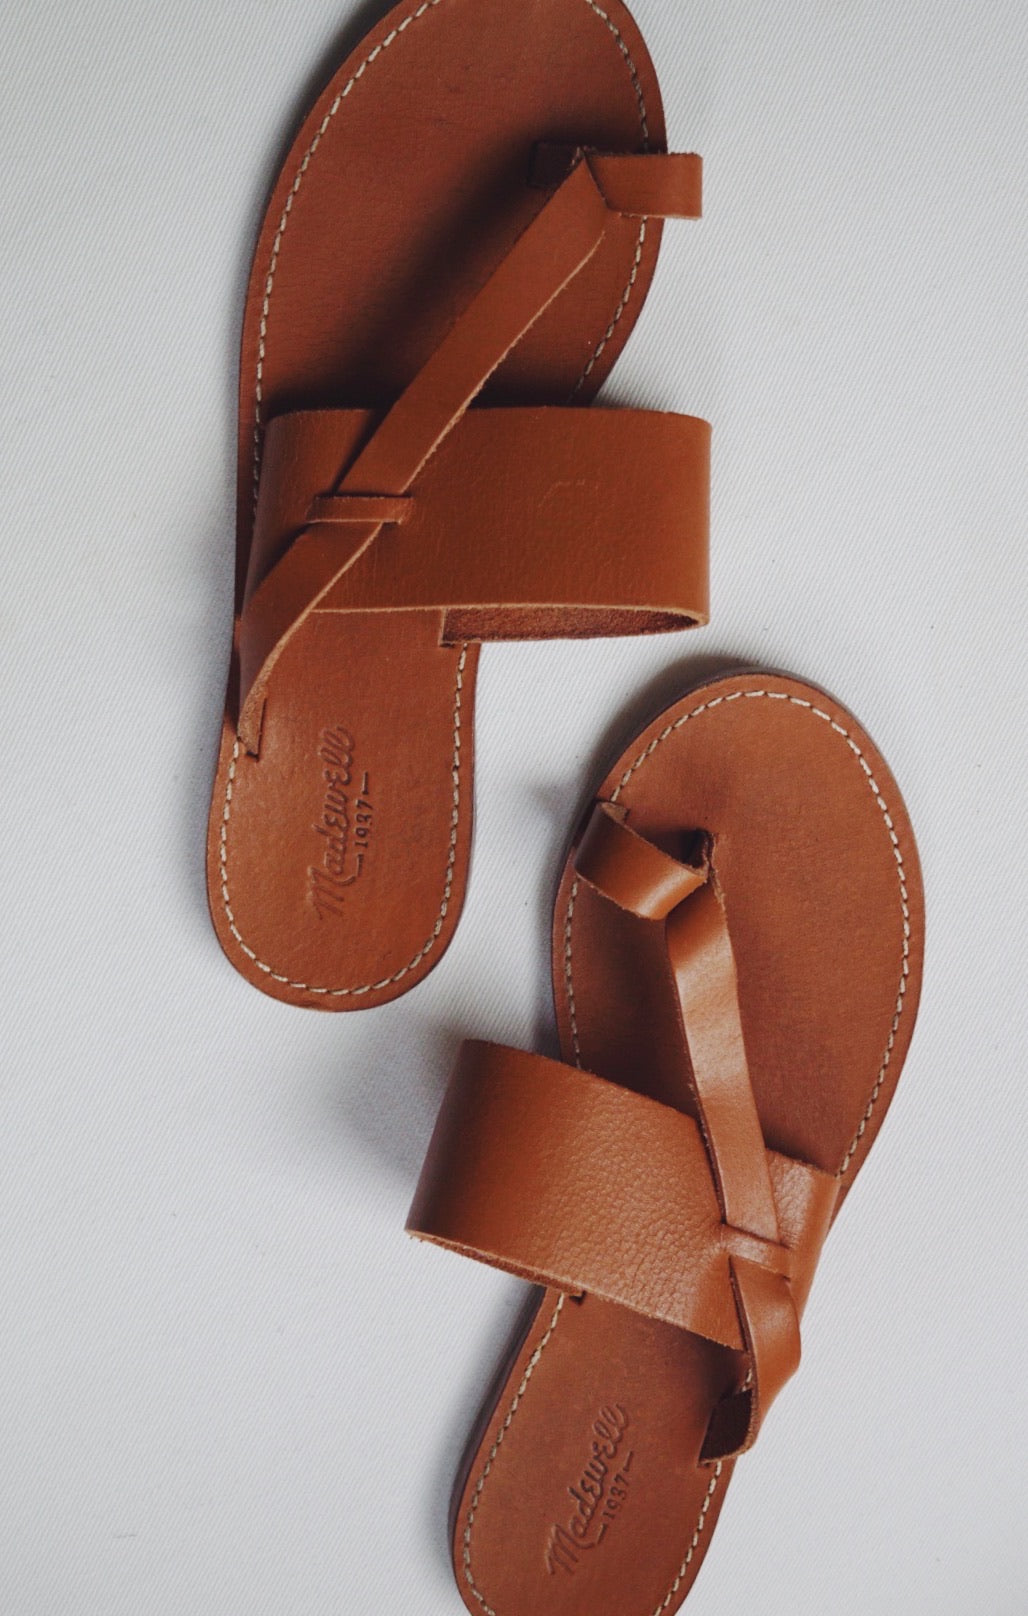 Madewell Leather Sandals